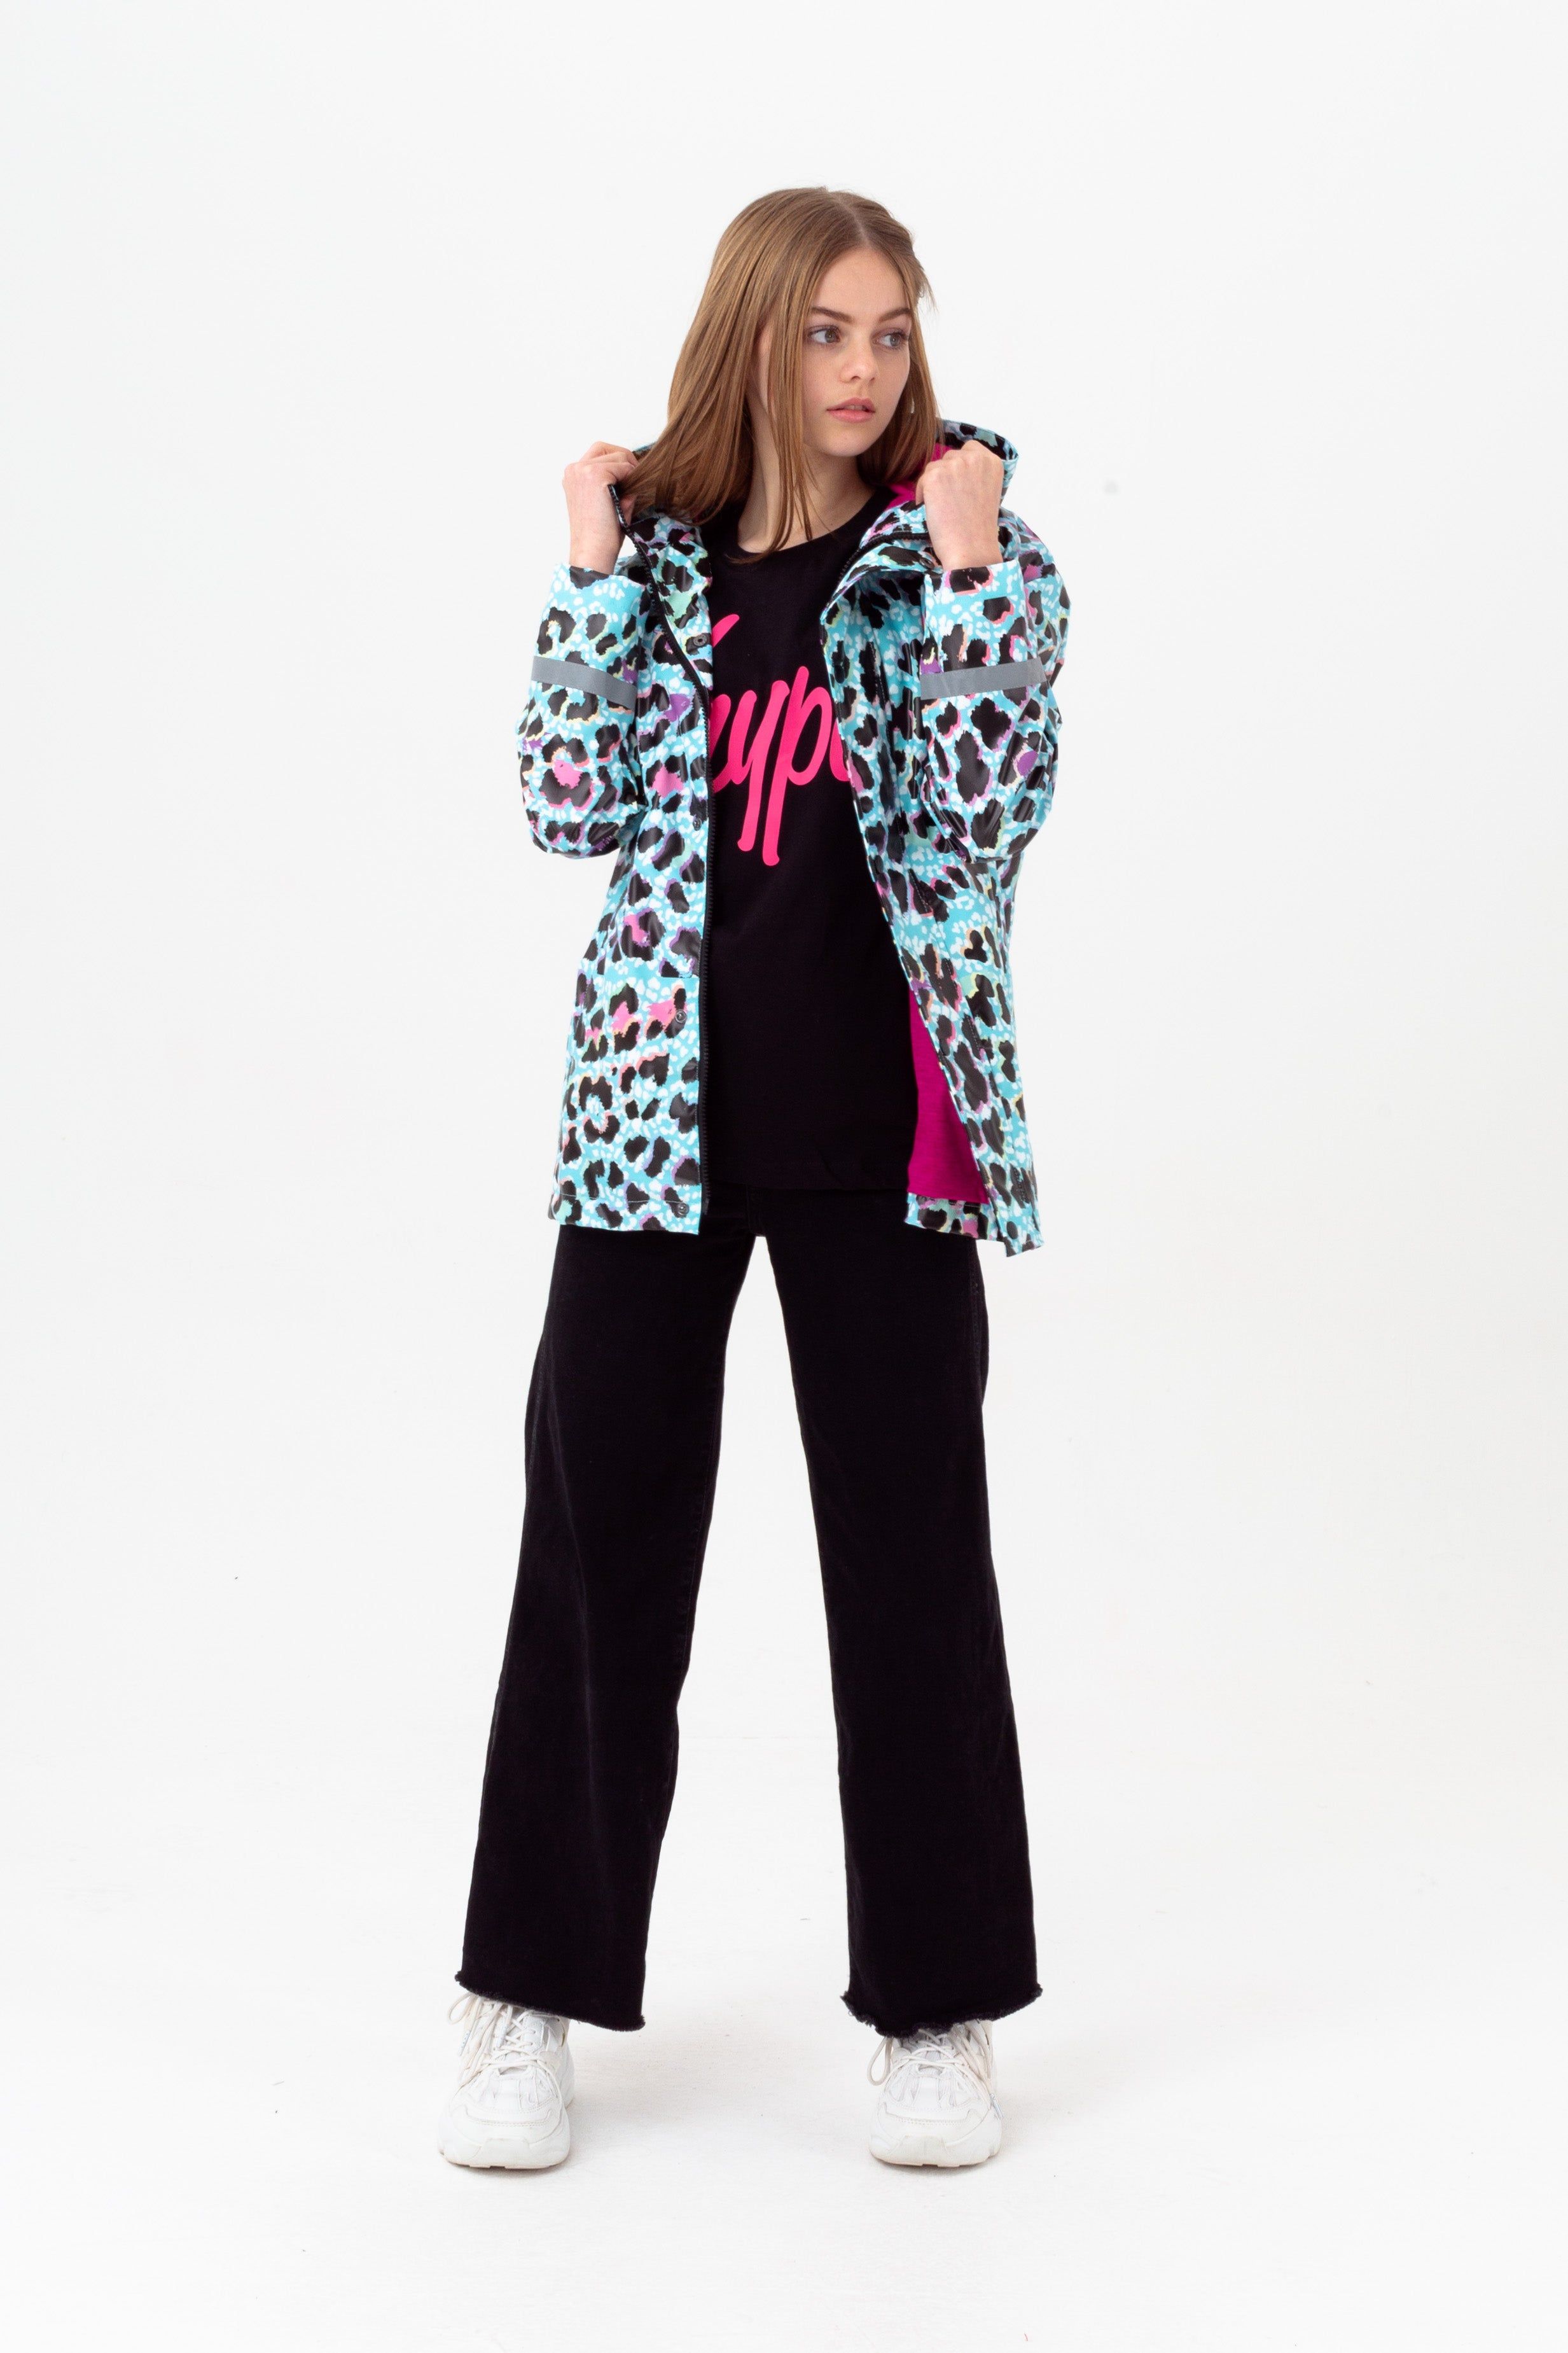 Don?t just keep cosy and dry during these colder months, do it in style with the HYPE. Girls Blue Ice Leopard Script Raincoat. Designed in our standard girls raincoat shape, boasting reflective cuff detail, a sublimated all-over blue ice leopard-inspired print, and the iconic HYPE. logo in contrasting pink script. Wear with jeans and a t-shirt or a HYPE. hoodie and matching joggers for the ultimate comfortable fit.